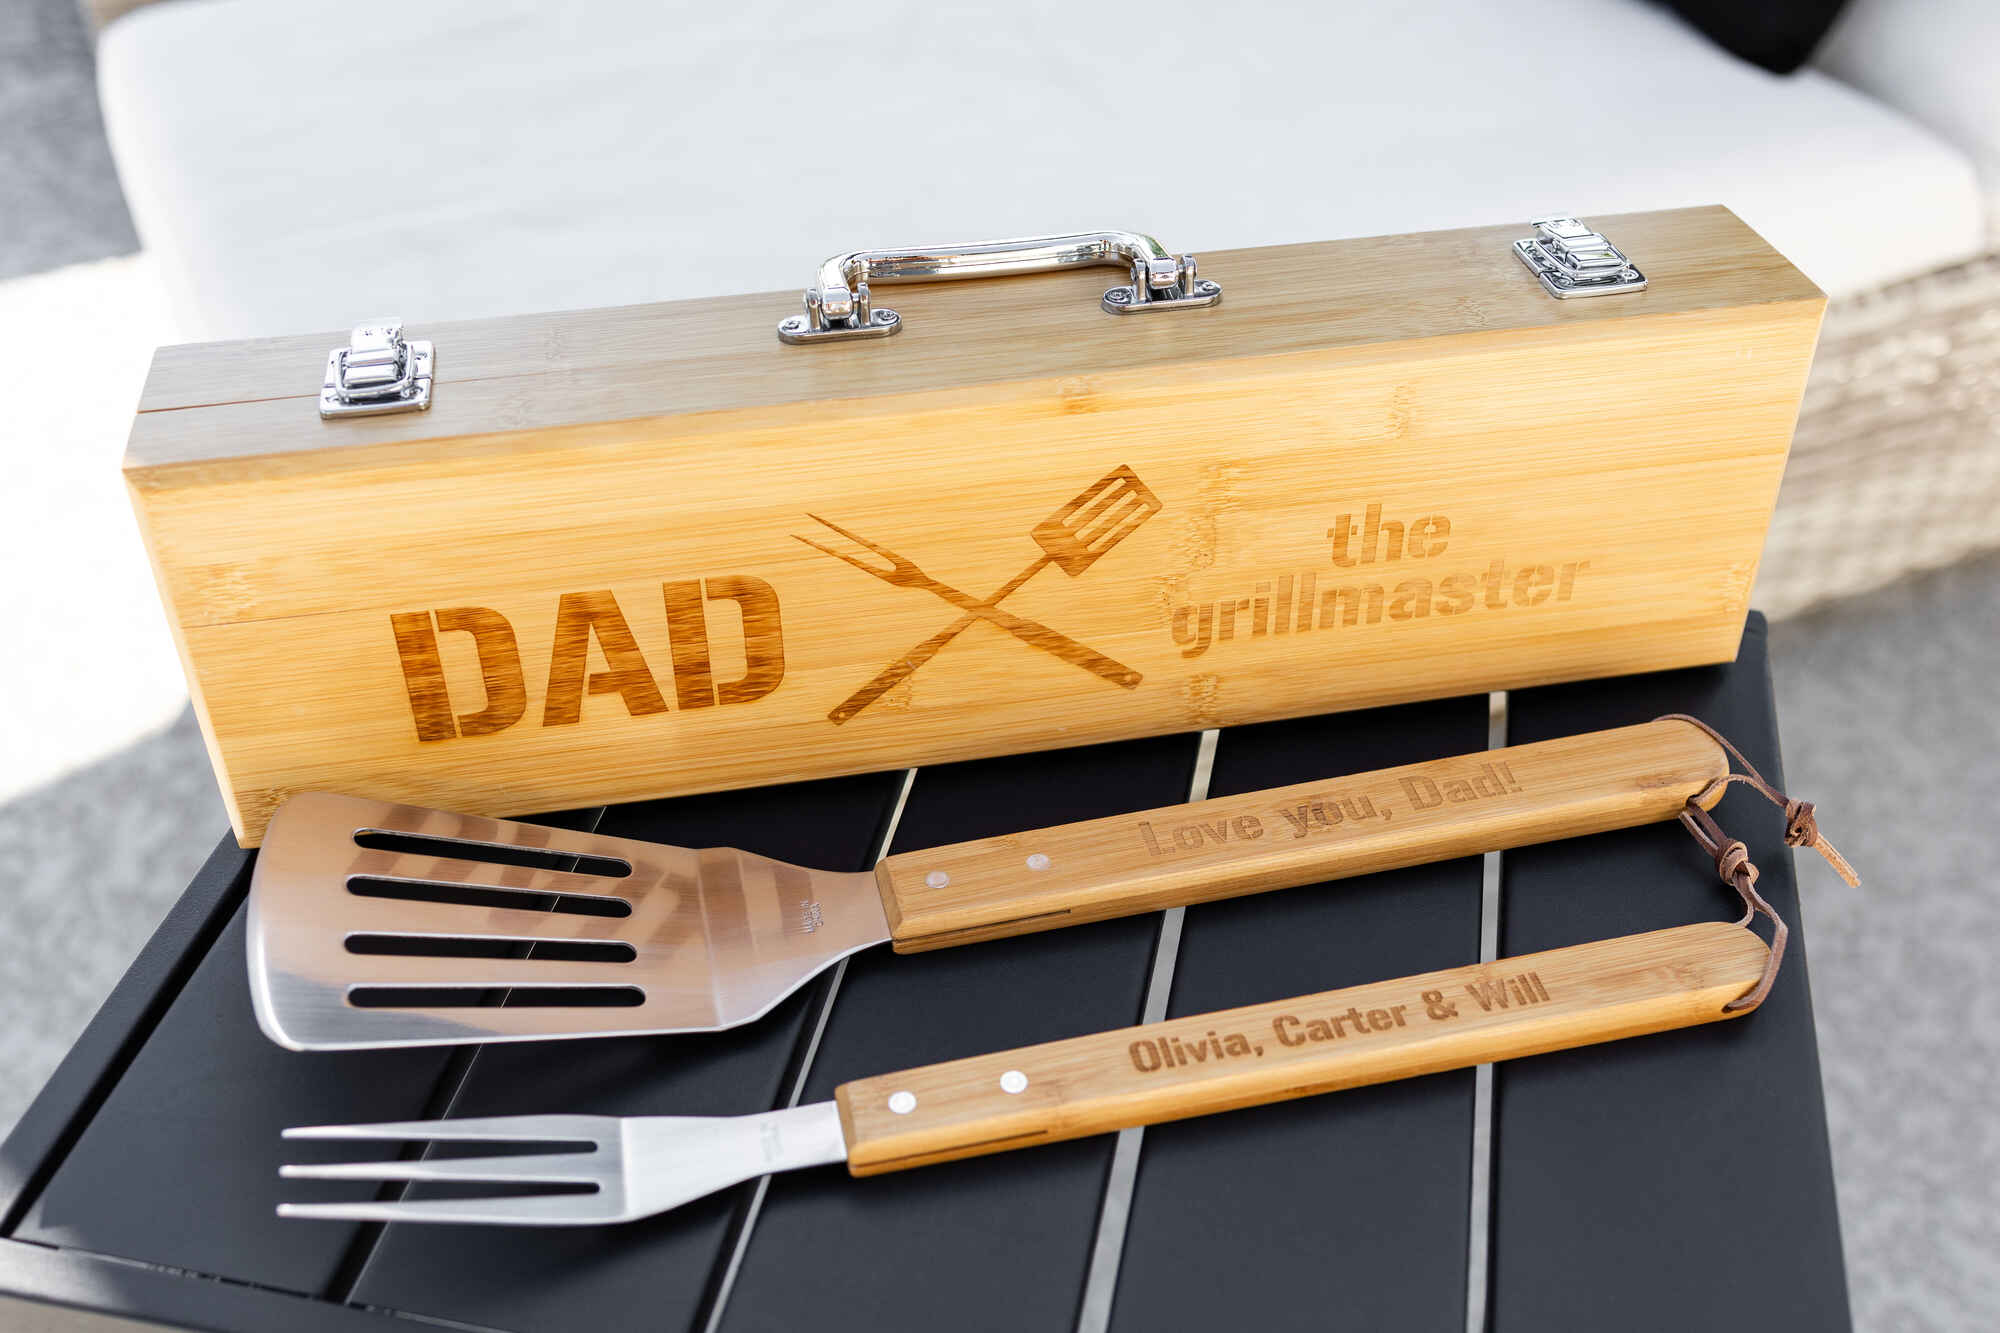 engraved personalized barbeque BBQ tools great for Dad fathers day gift